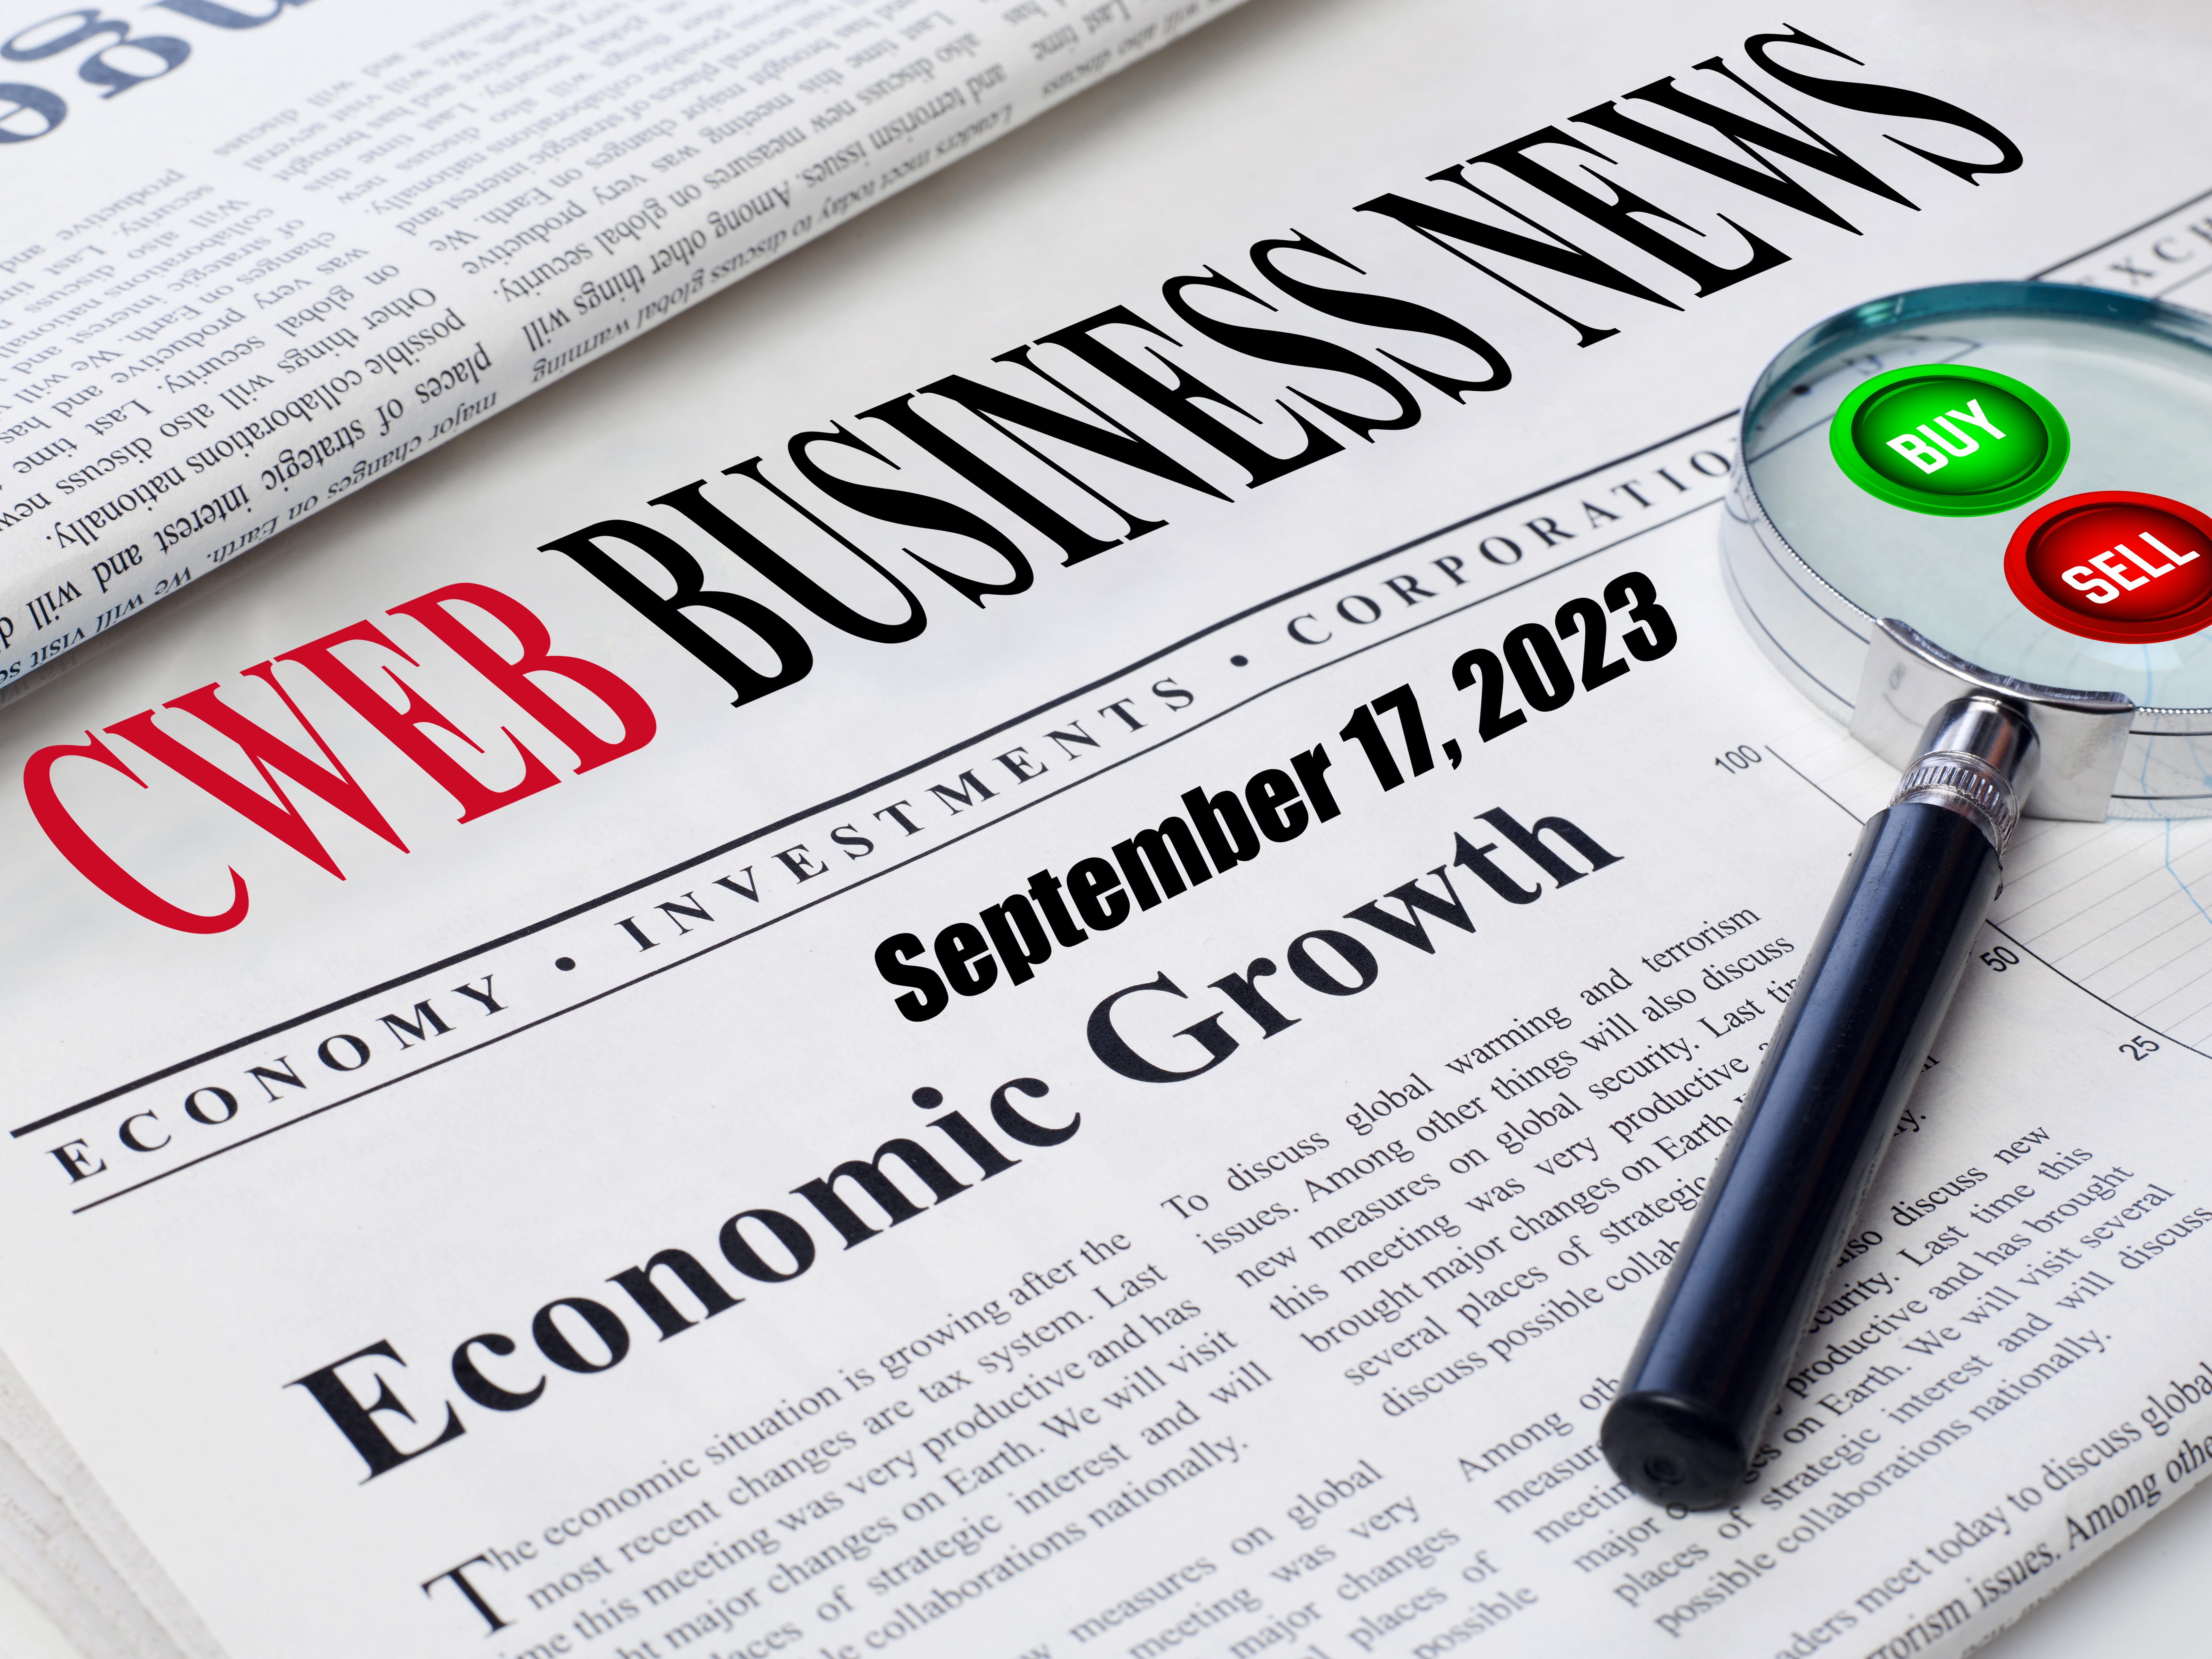 CWEB Publishes Roundup of Business and Trending News Highlights that Matter the Most - October 16, 2023